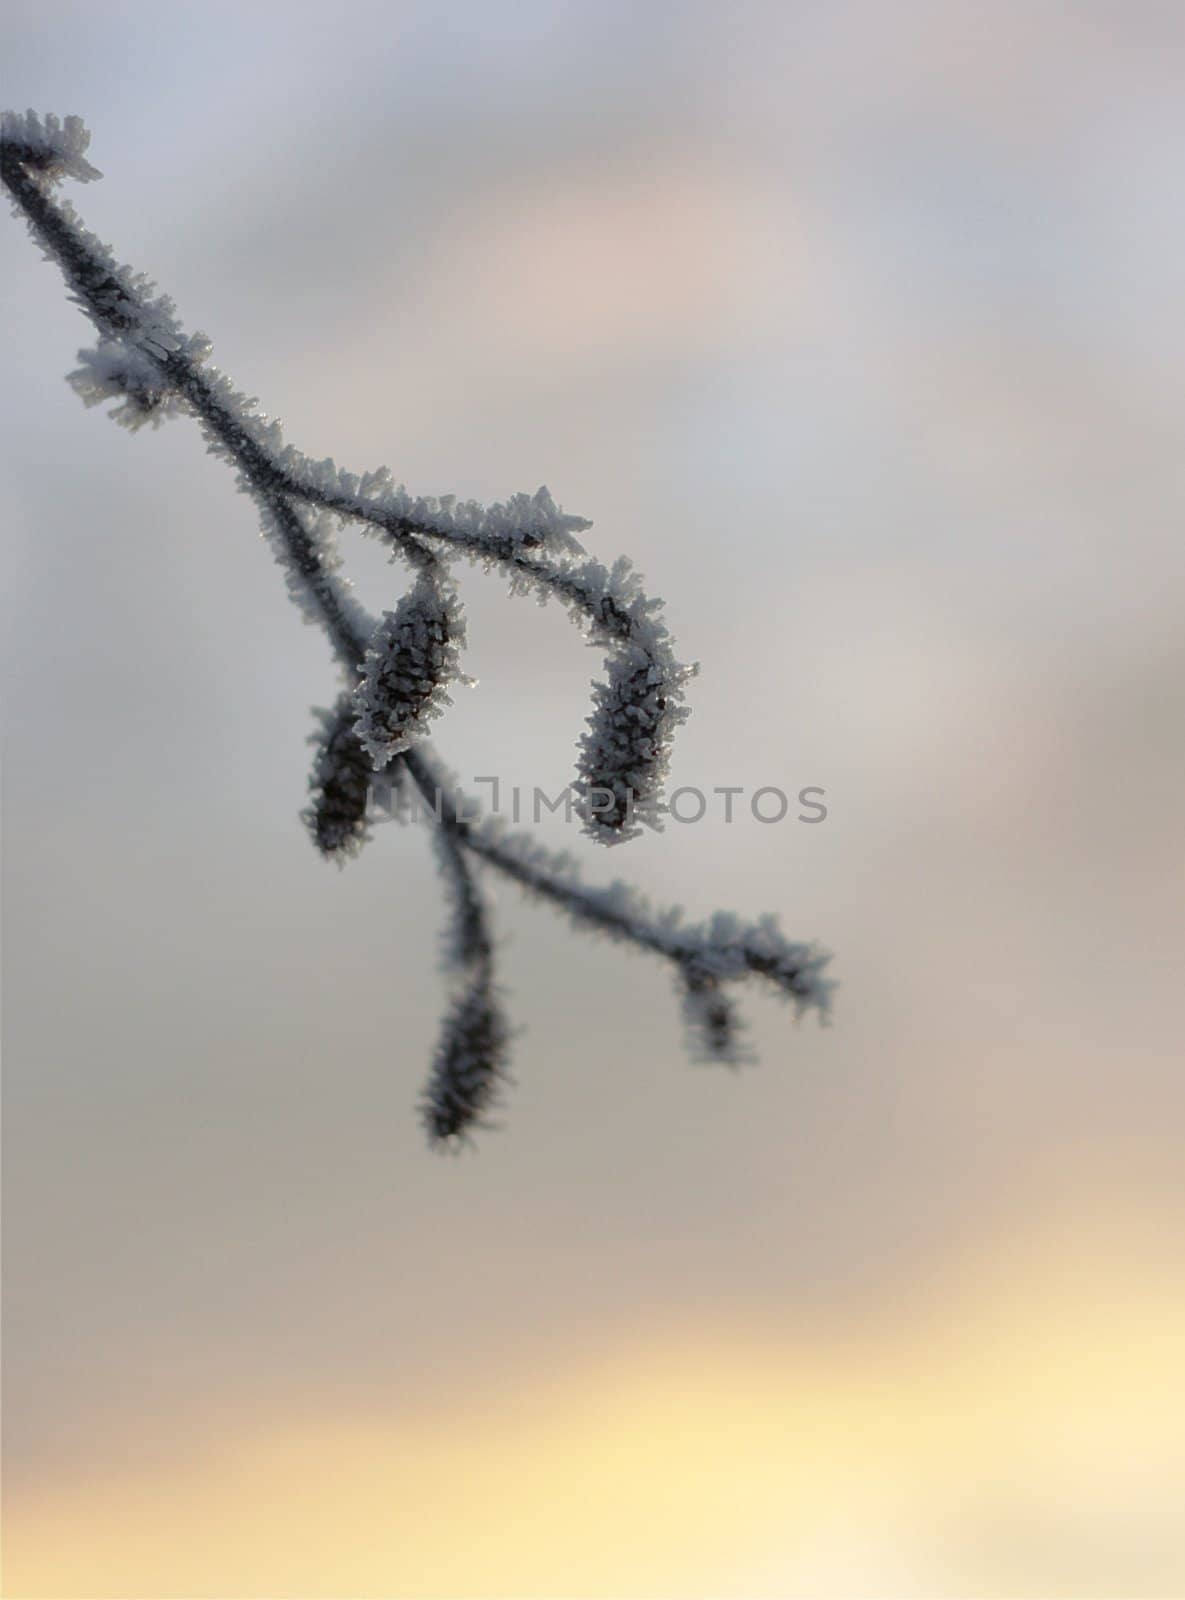 Branch outlined in ice crystals